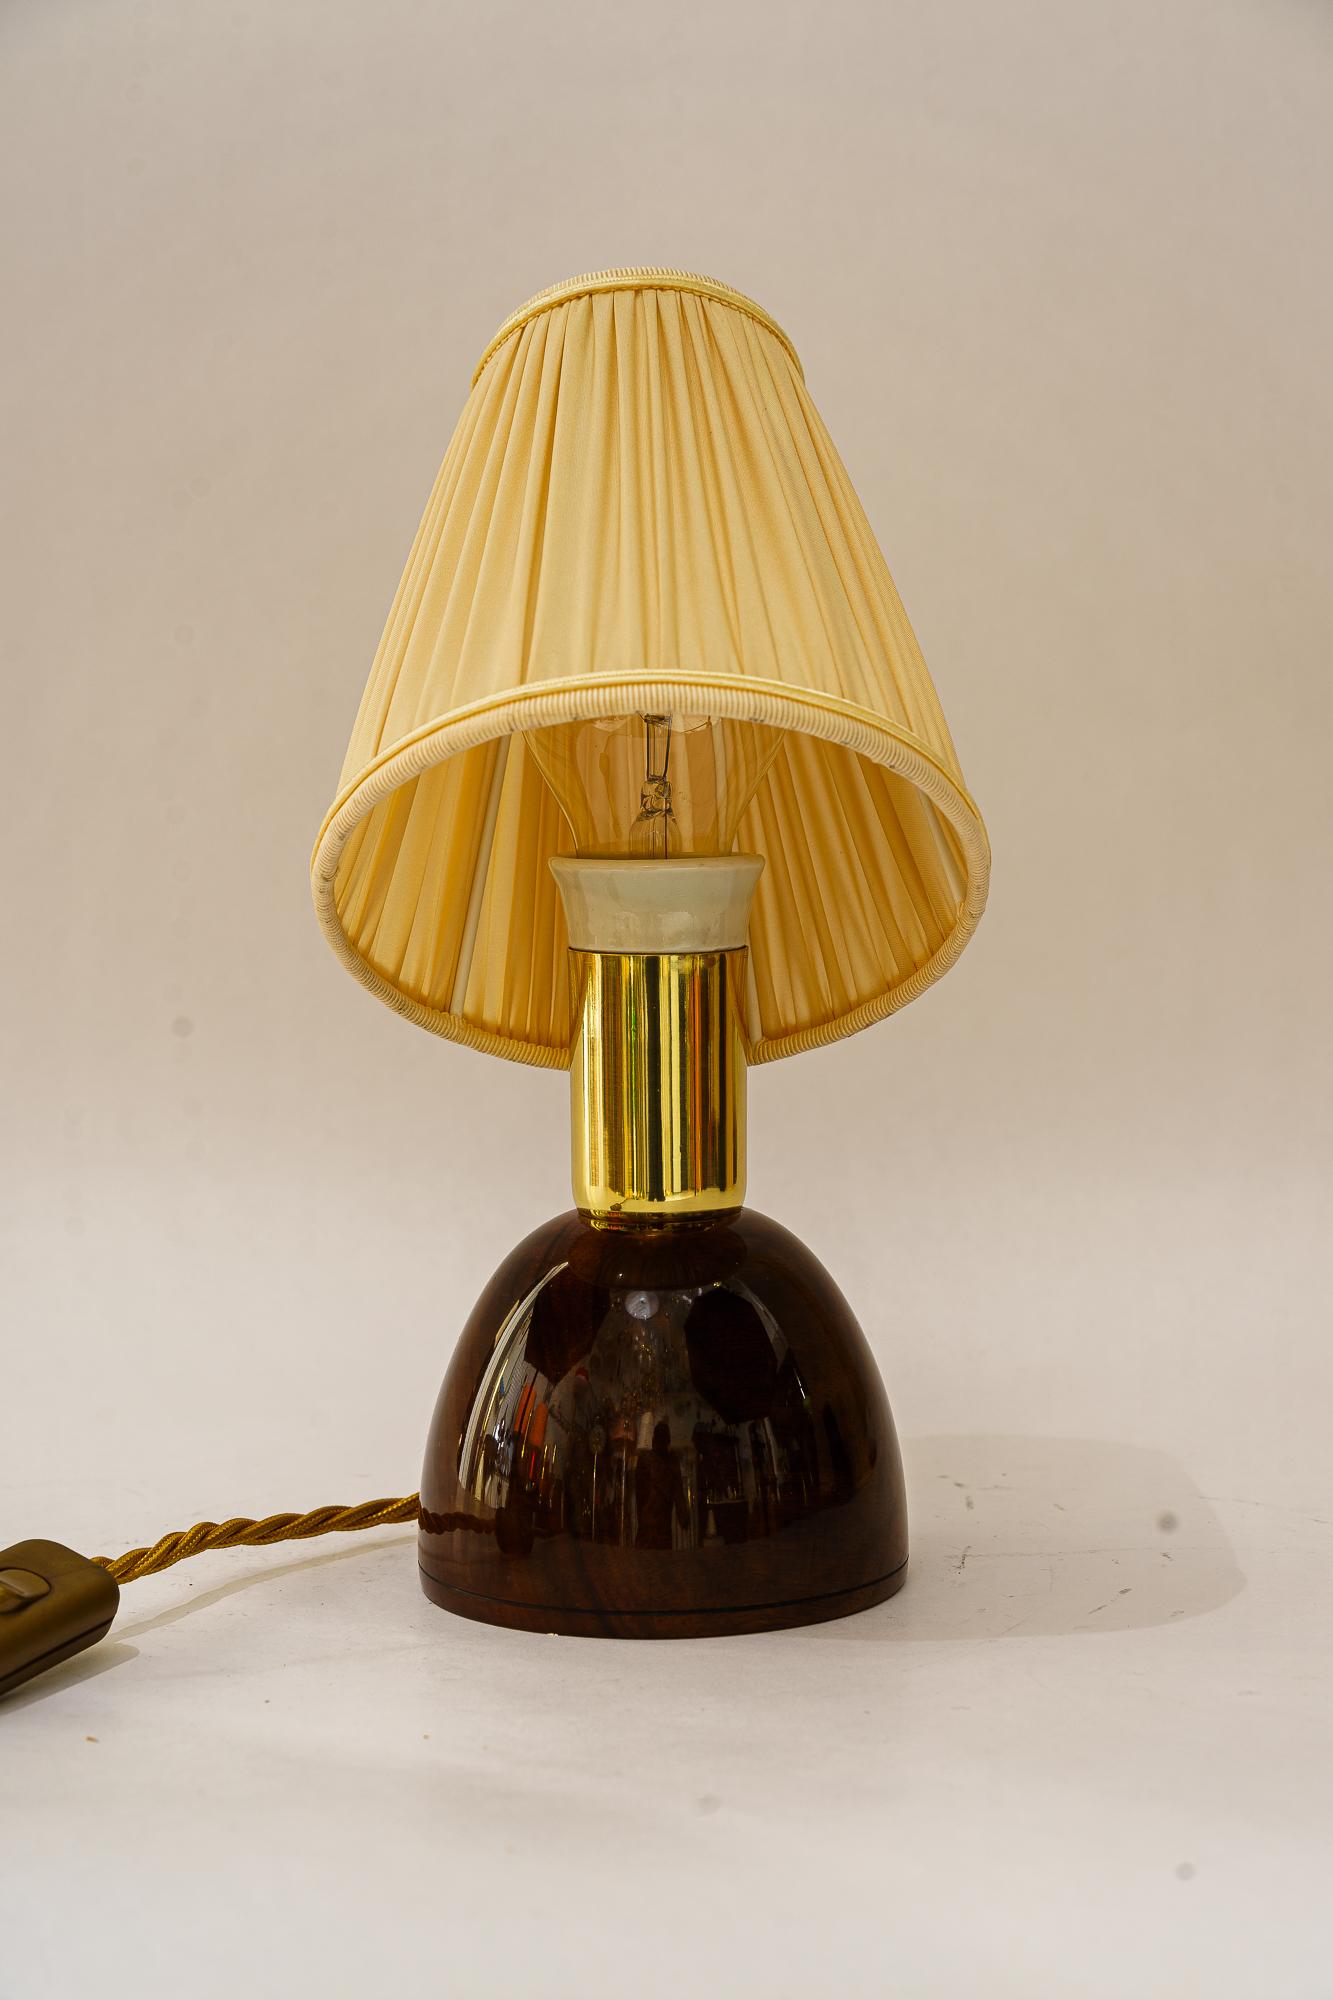 Rupert nikoll nut wood table lamp with fabric shade vienna around 1950s
Brass polished and stove enameled
Nut wood polished
The fabric shade is replaced ( new )
Exstraordinary model